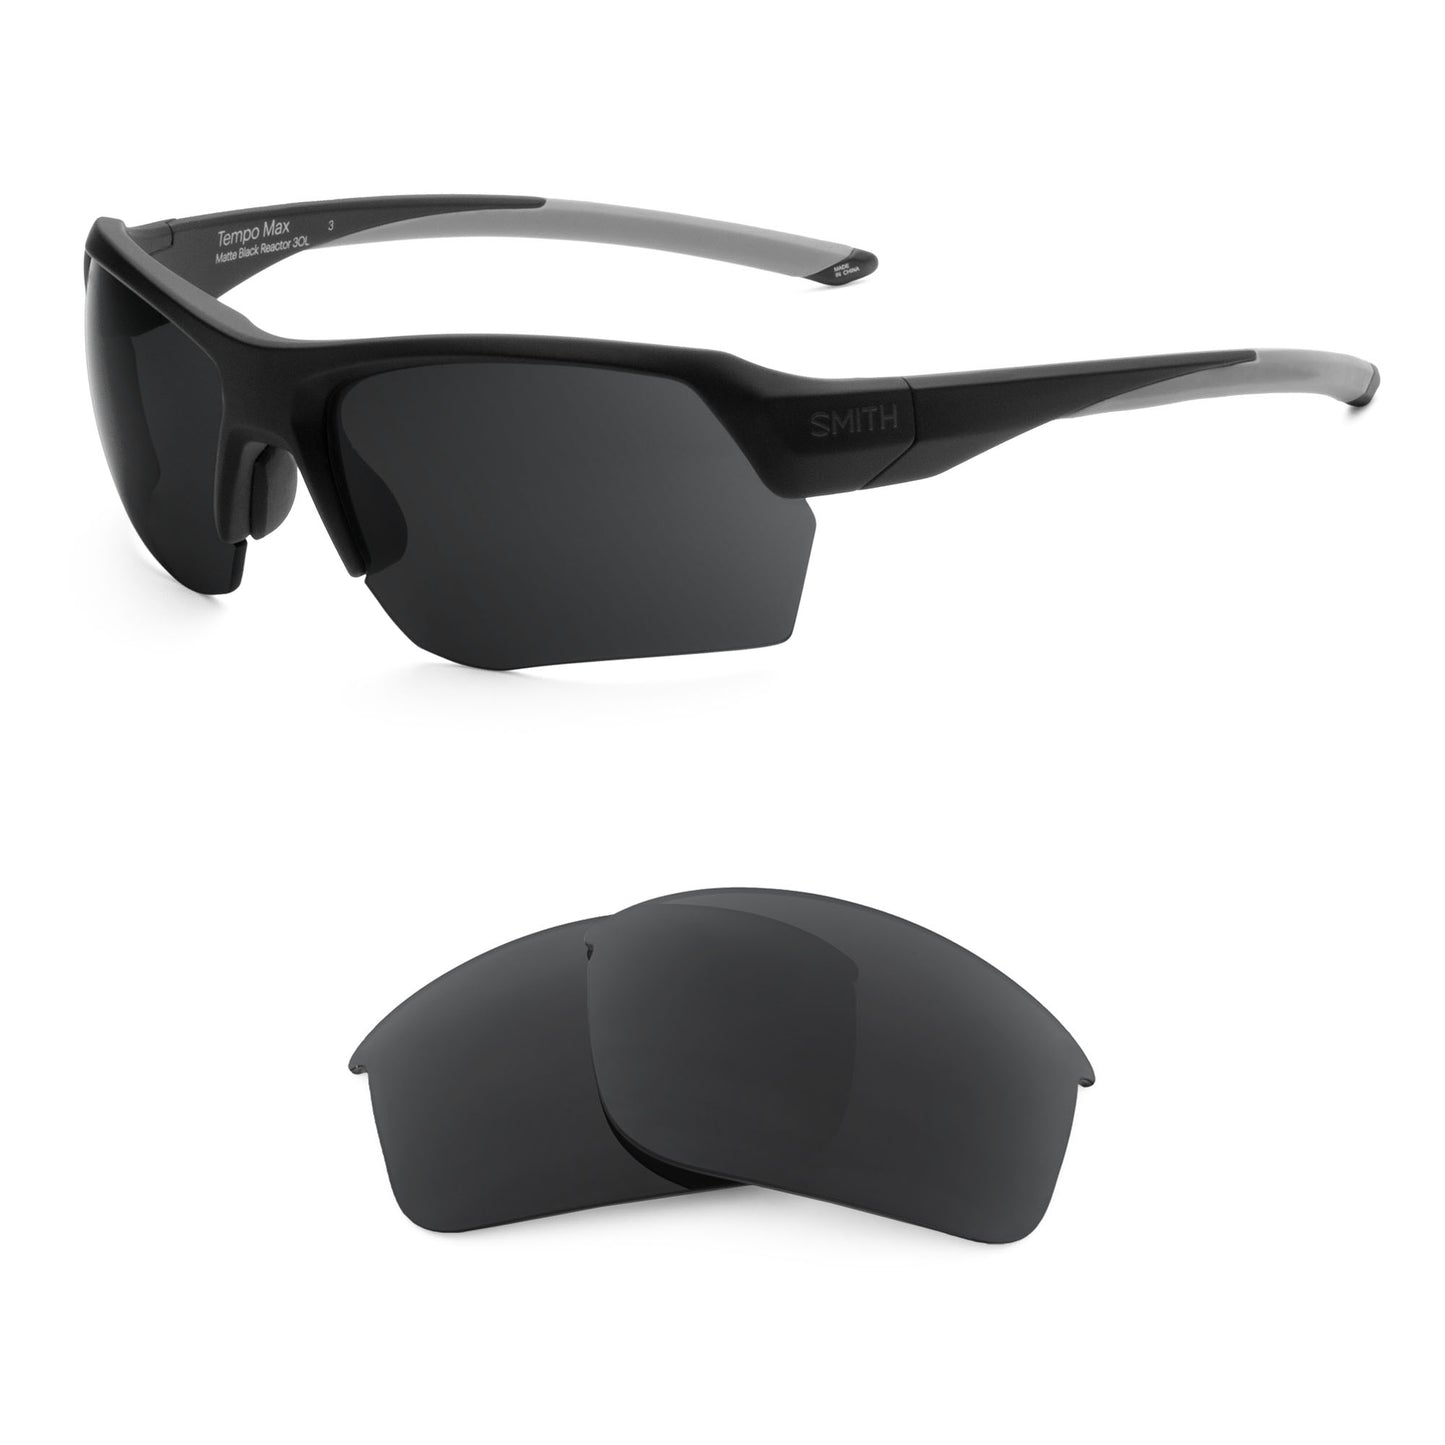 Smith Tempo Max sunglasses with replacement lenses